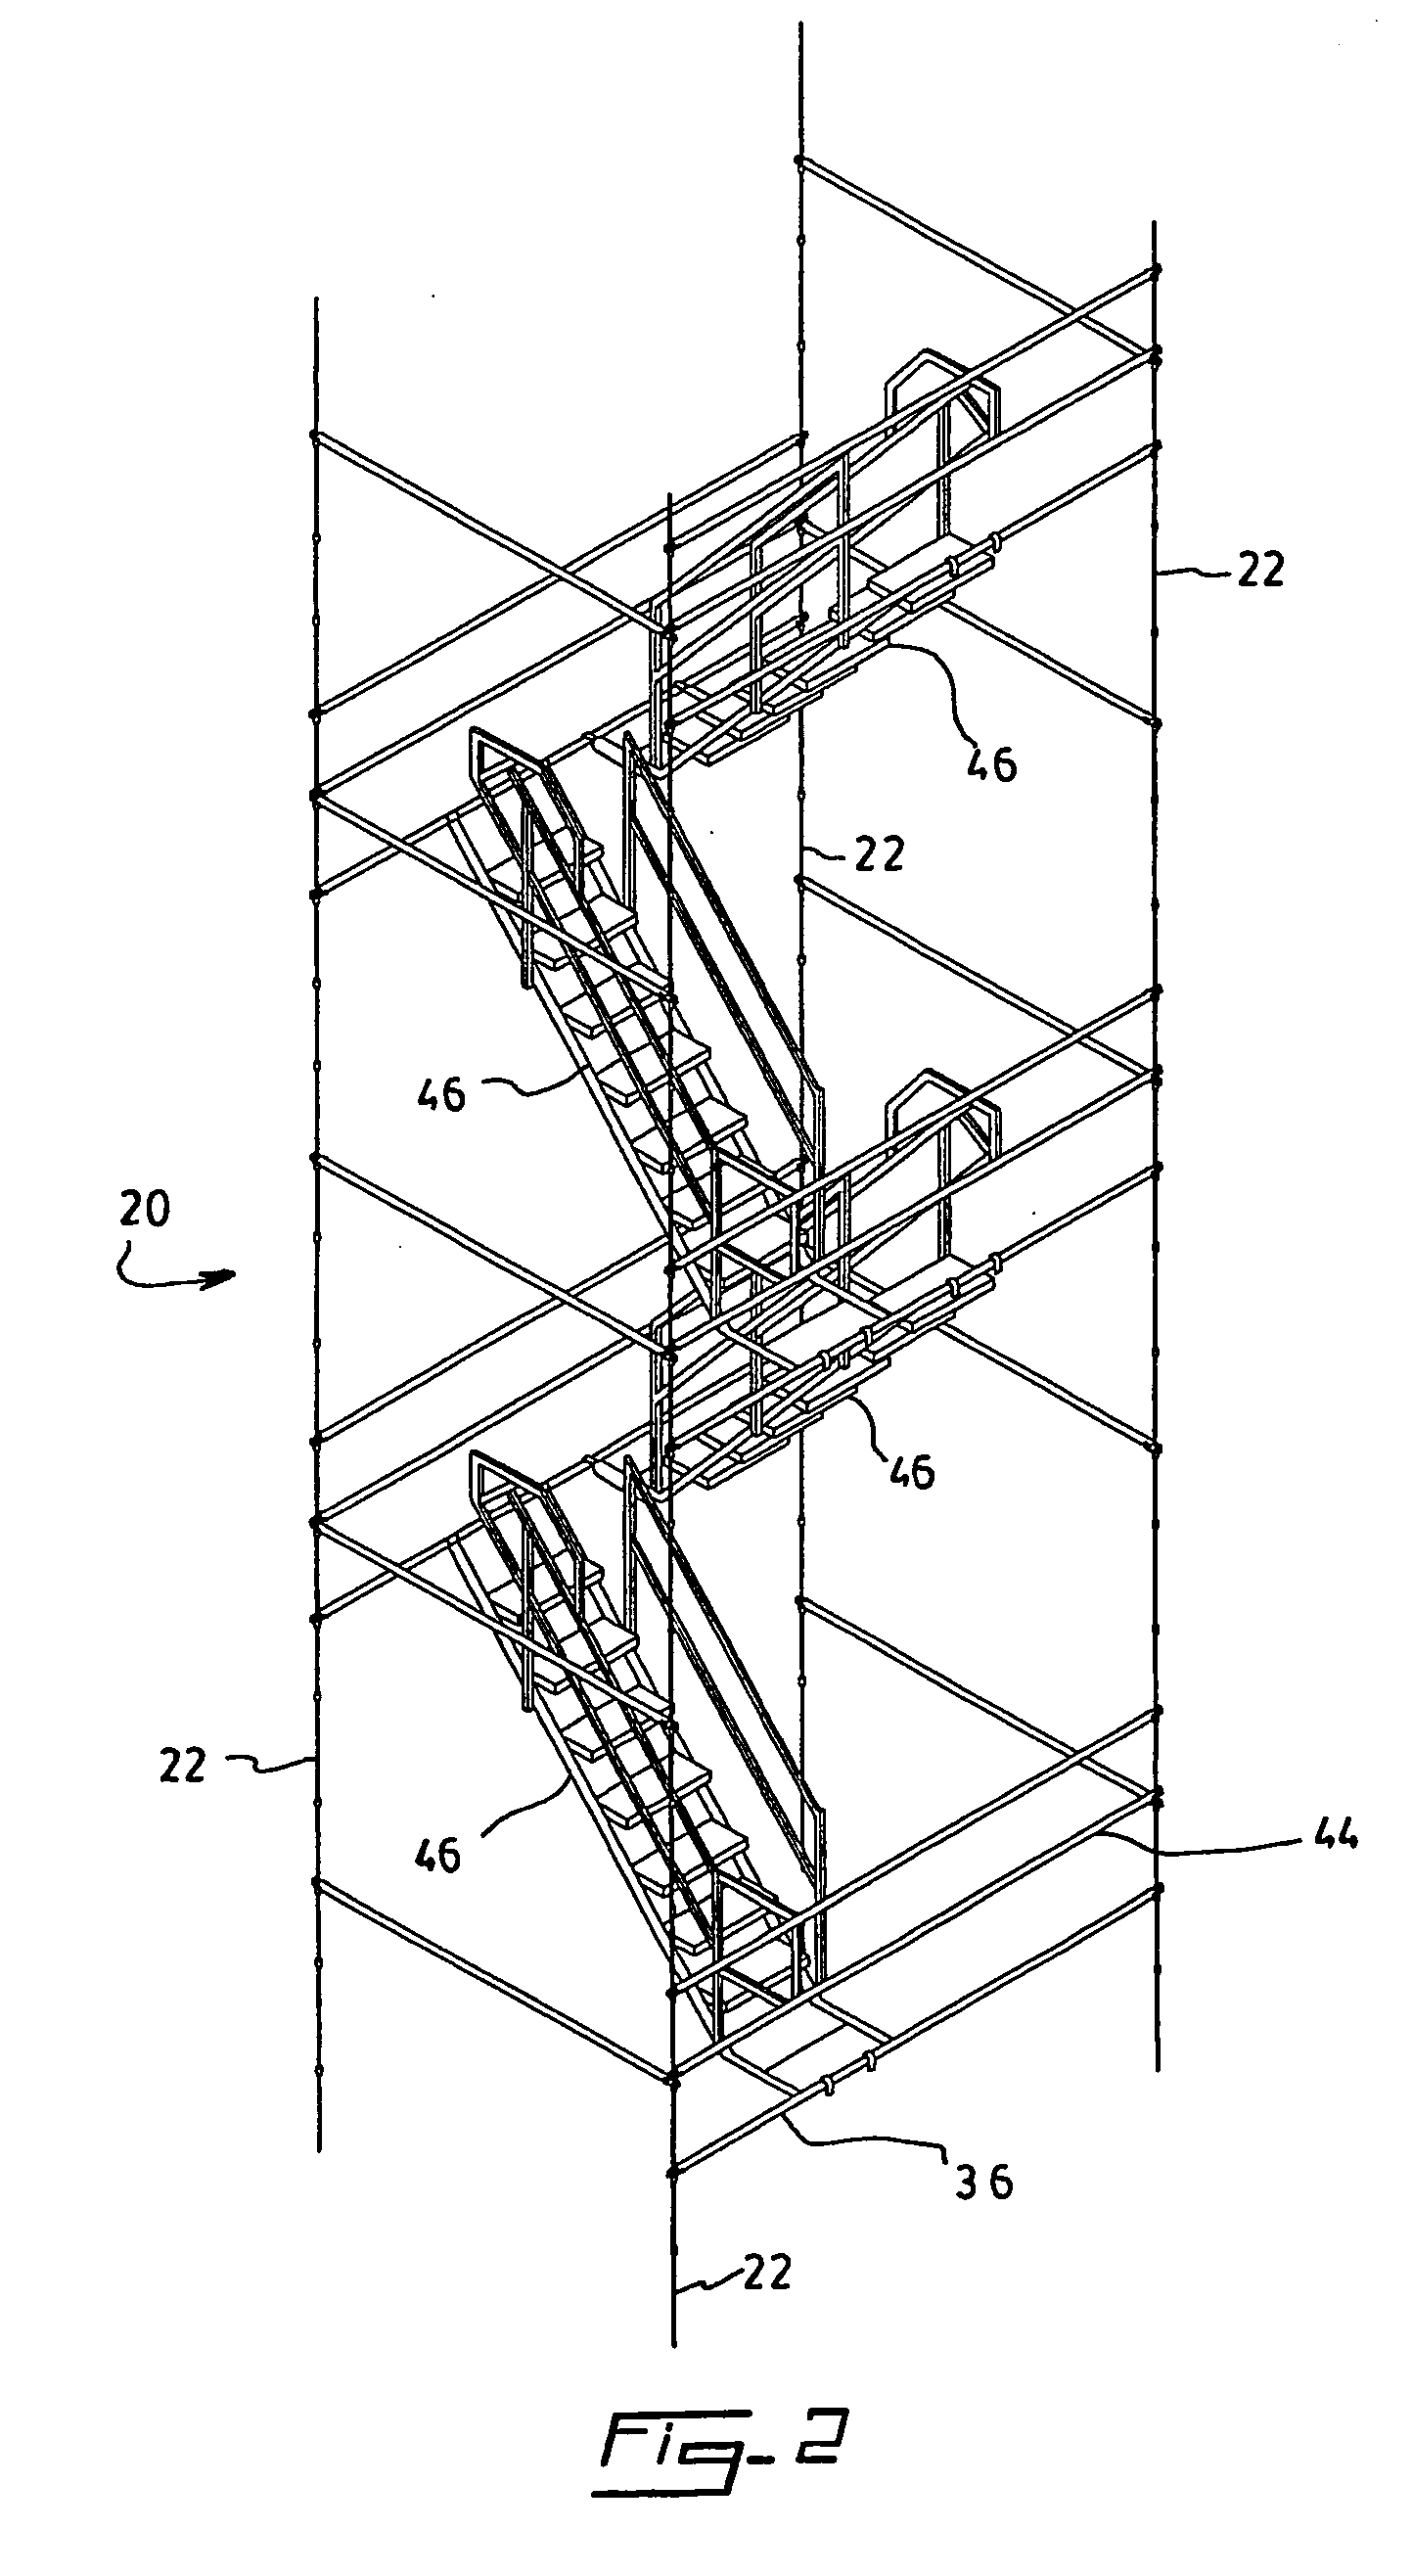 Suspended cable scaffold assembly